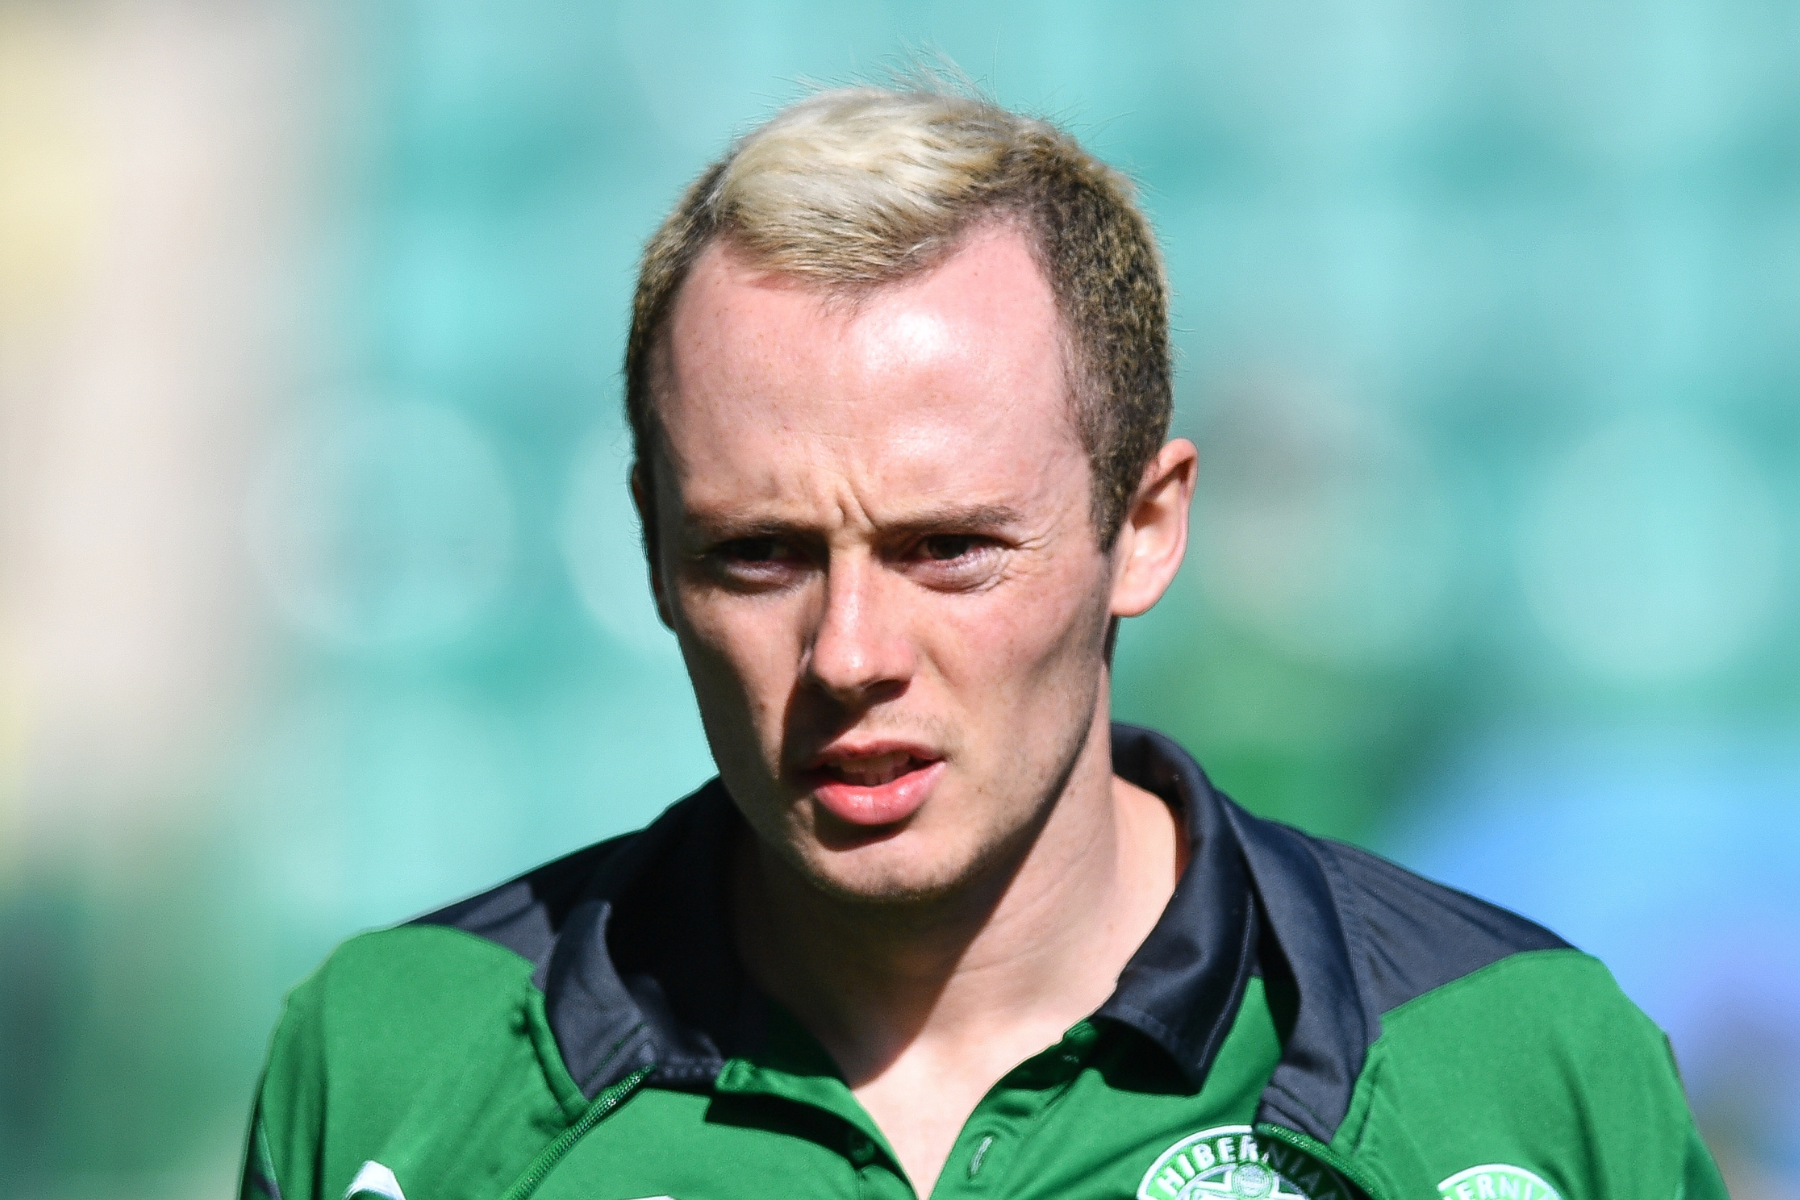 McKirdy facing possible Hibs disciplinary action over Instagram post